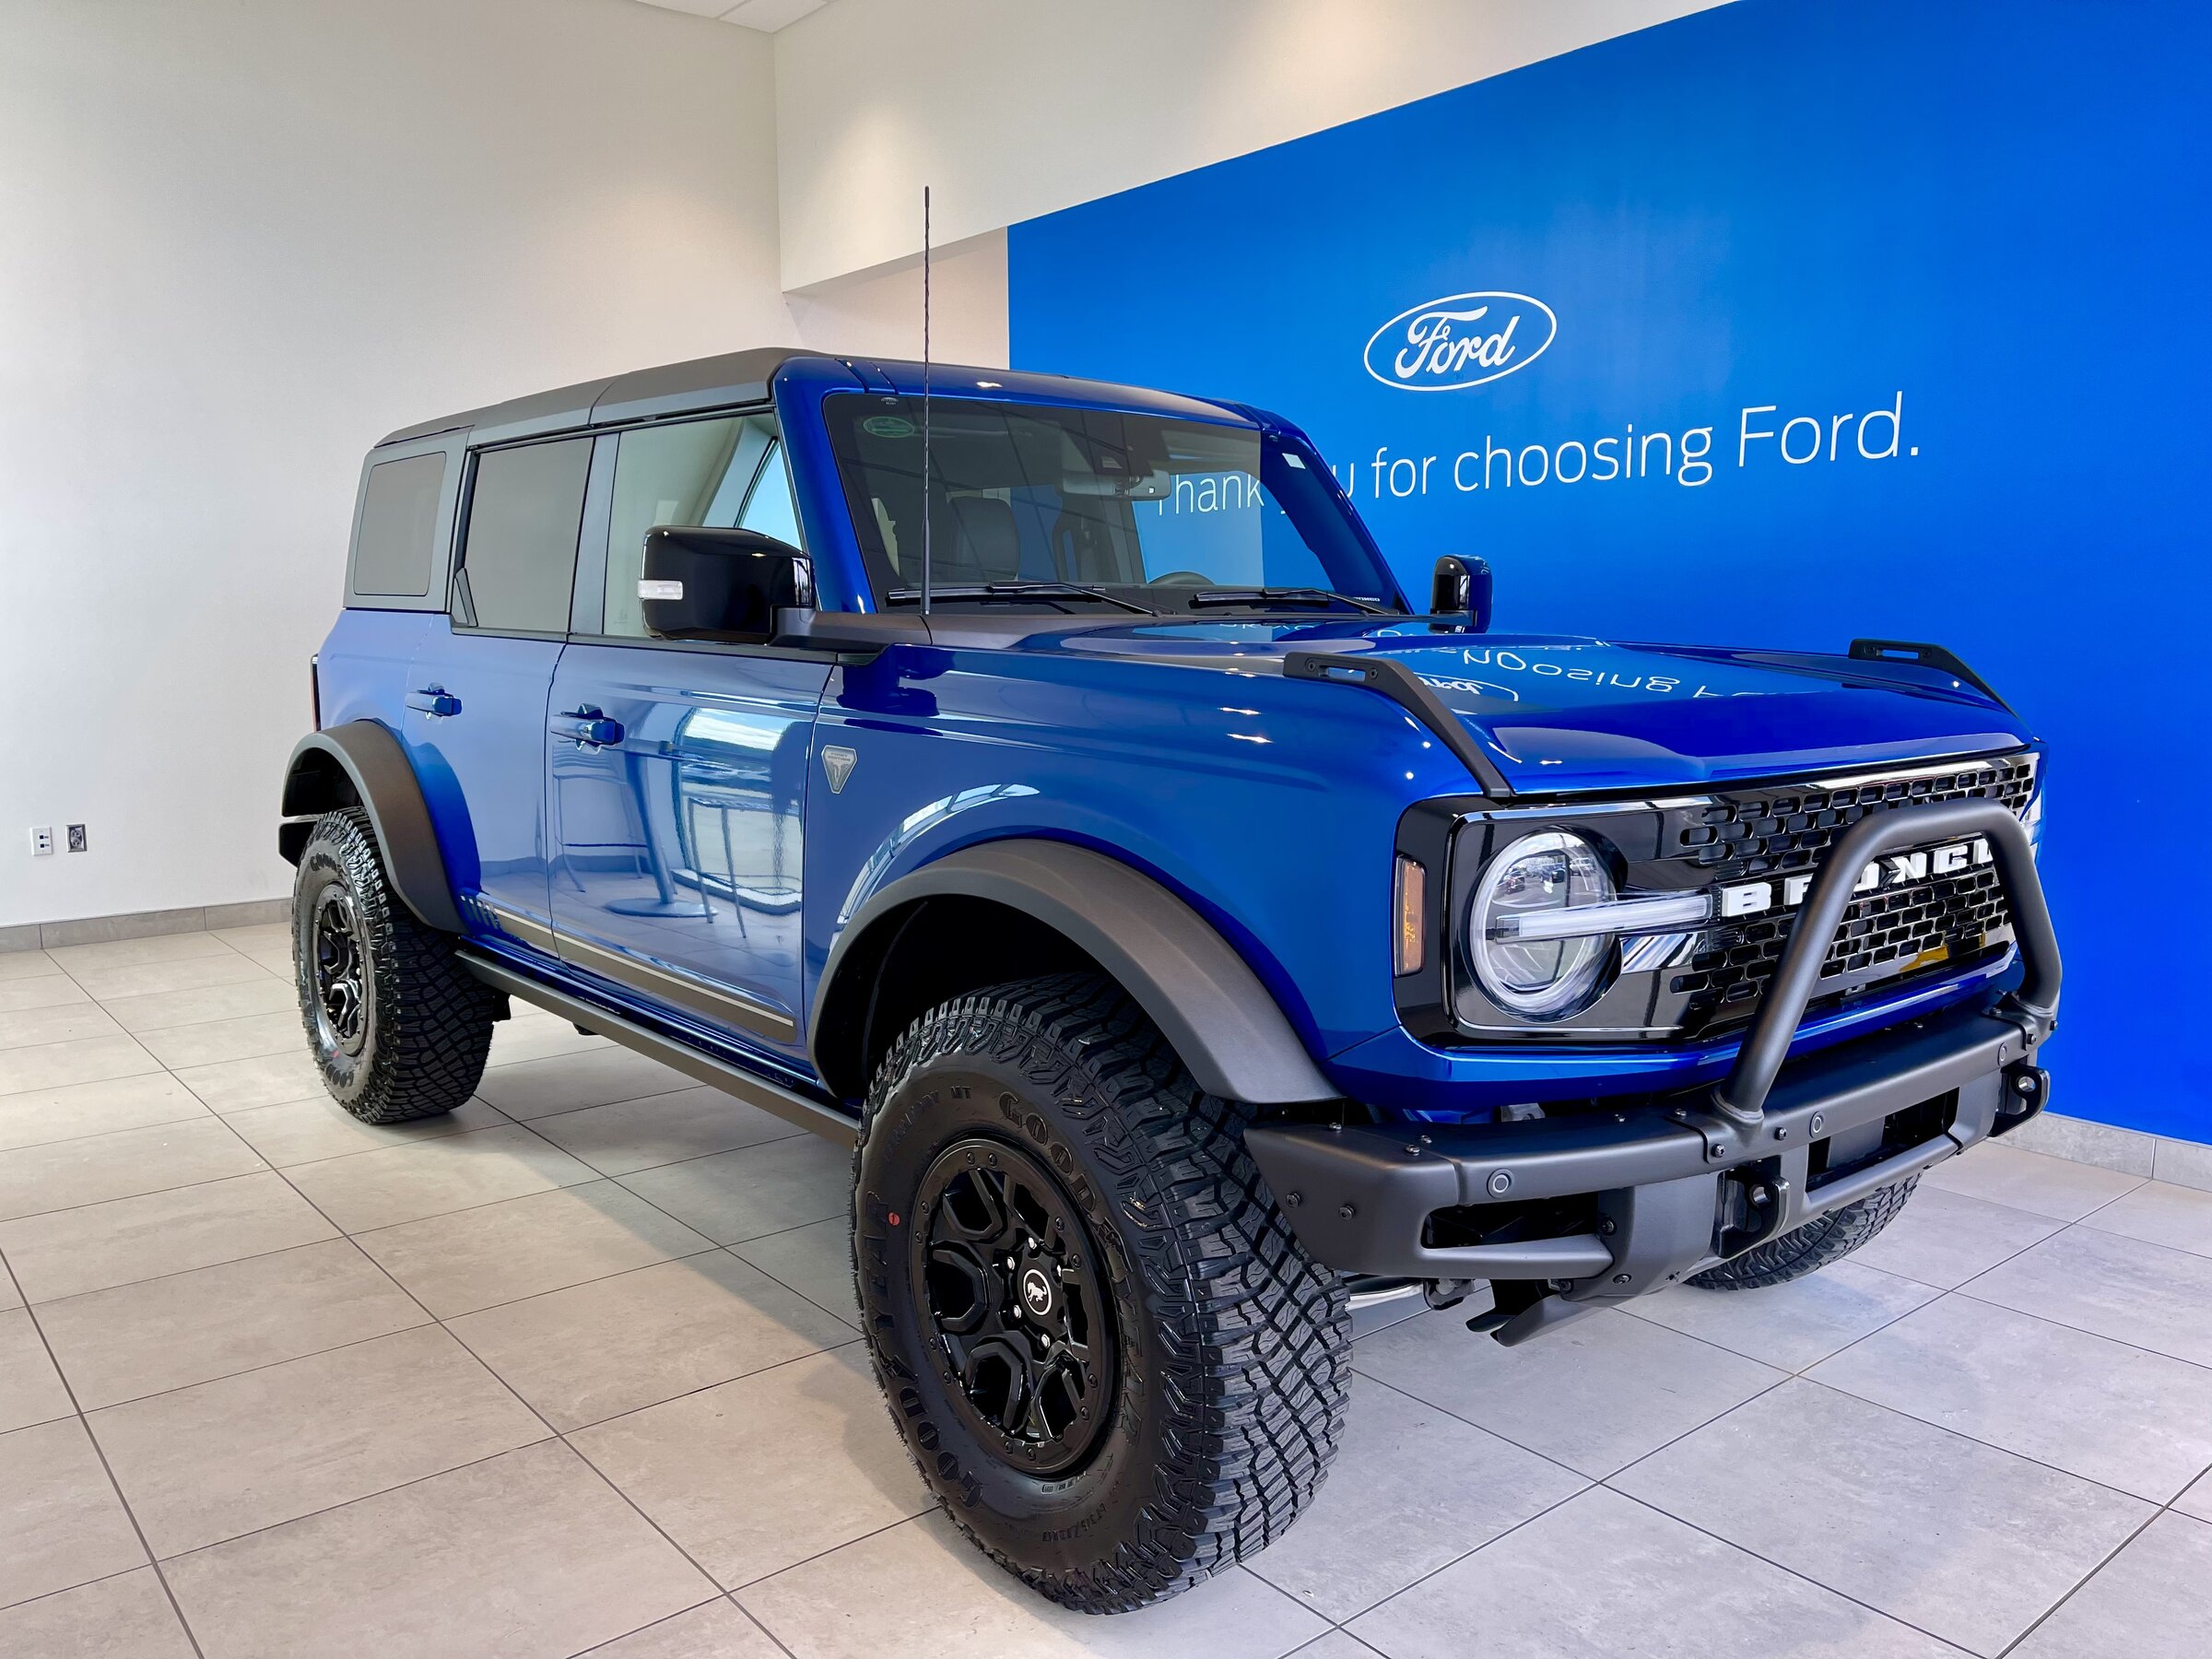 Ford Bronco Give a shout out to your dealership if they honored MSRP pricing 6ACDB557-7605-4EBD-AE4D-5AD7C1C41A35